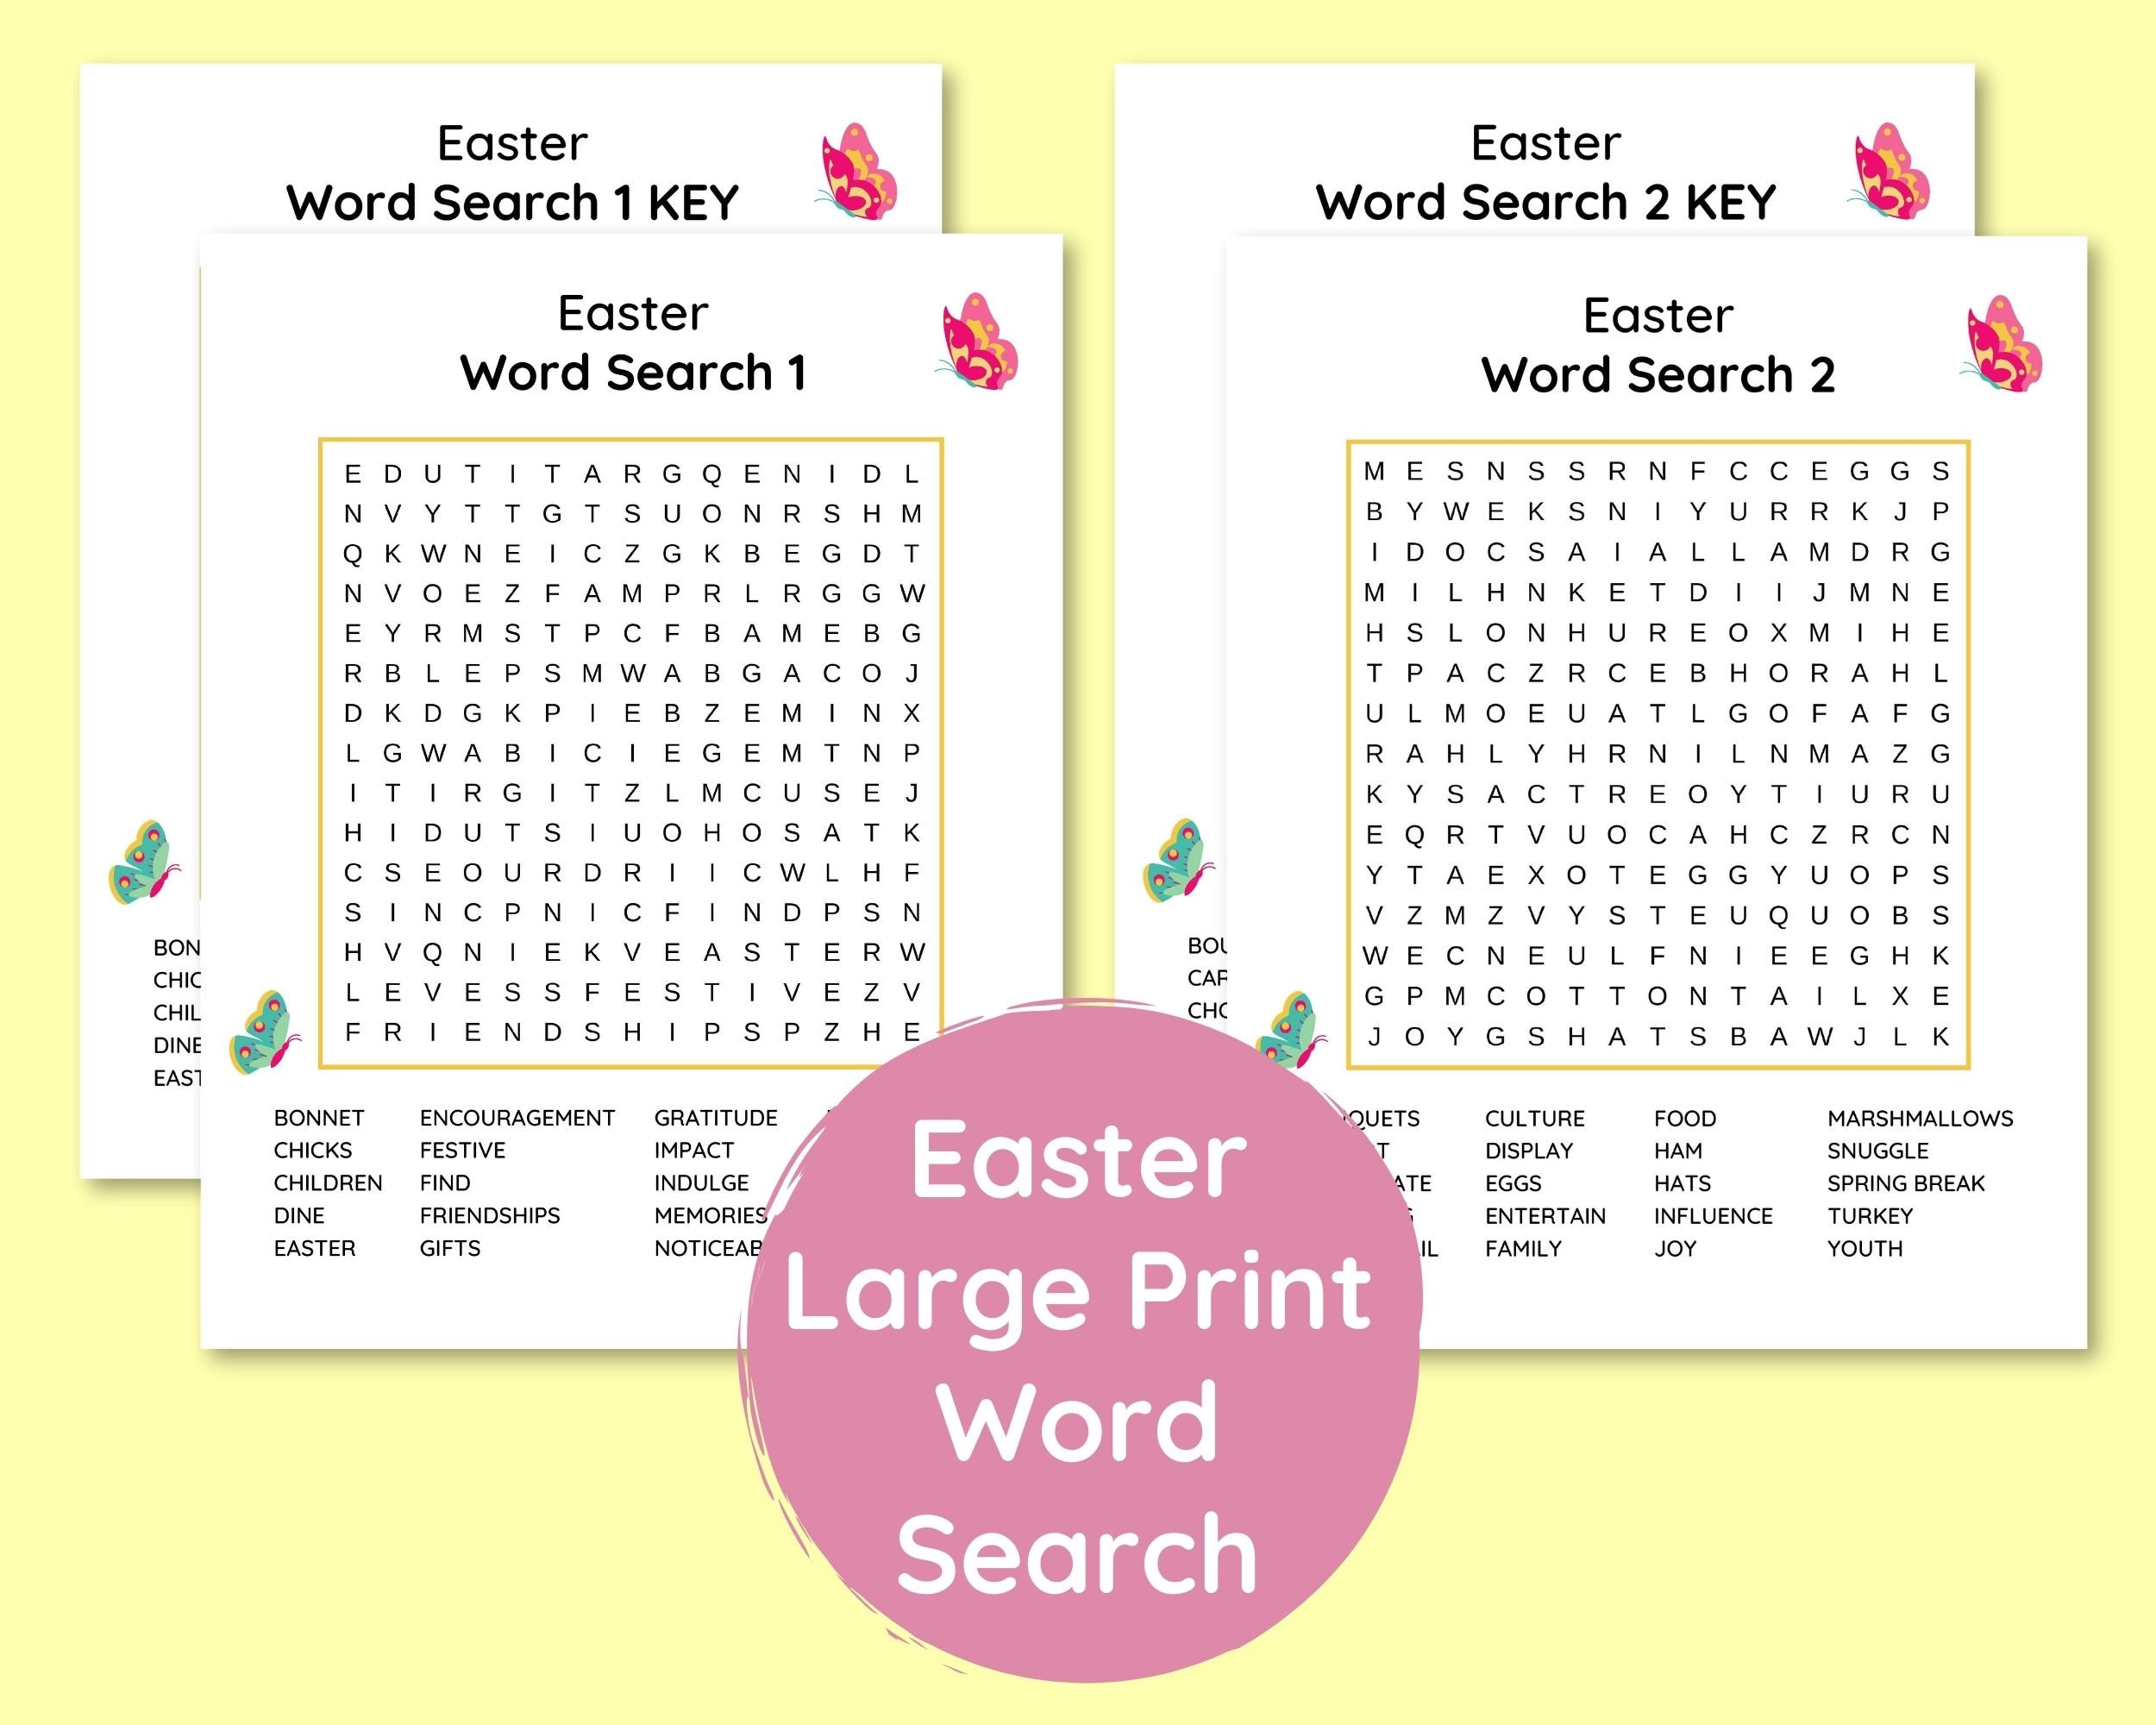 5-large-print-easter-word-search-puzzles-for-seniors-adults-etsy